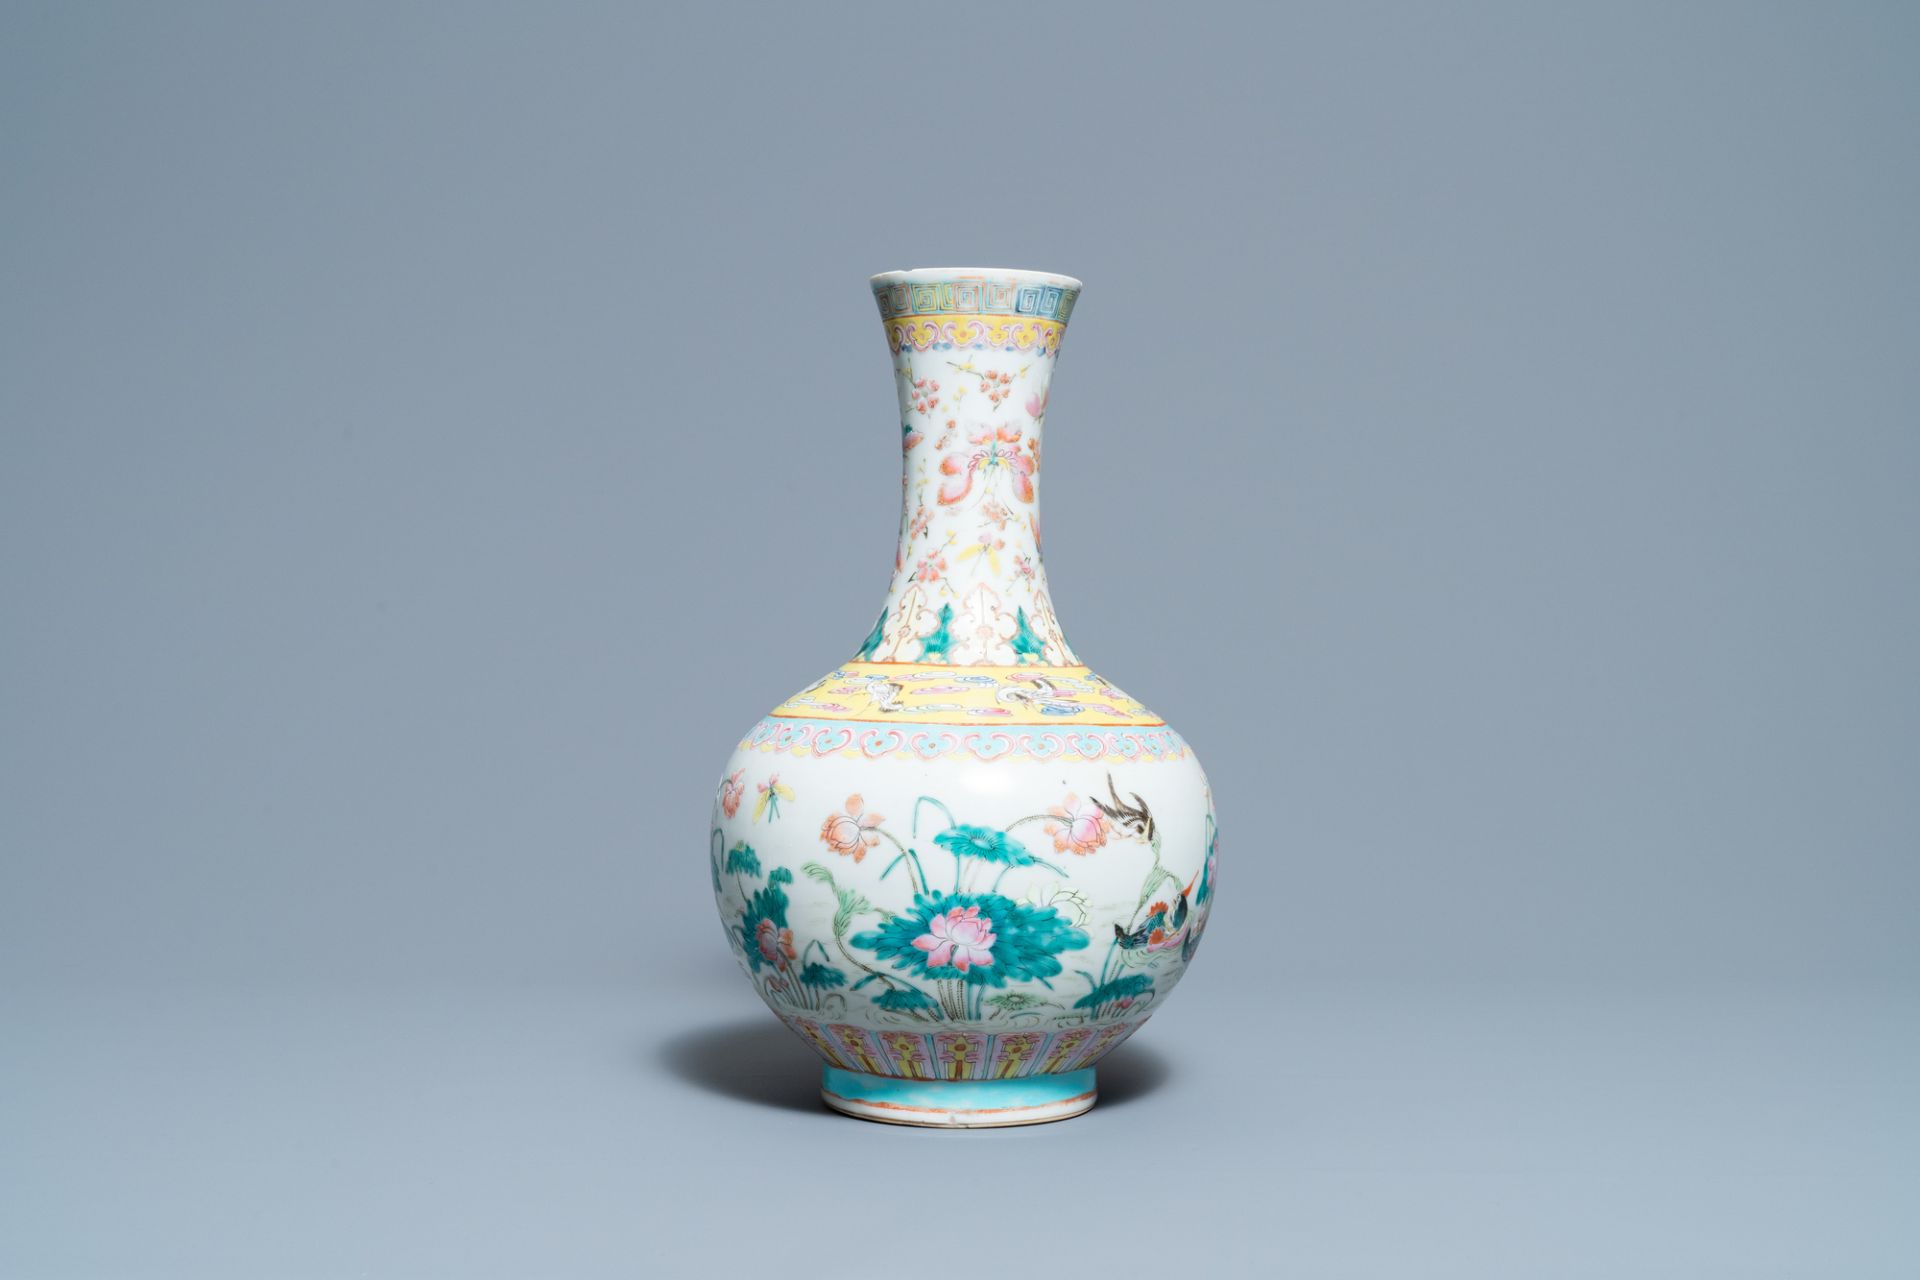 A Chinese famille rose bottle vase with mandarin ducks in a lotus pond, 19th C. - Image 3 of 6